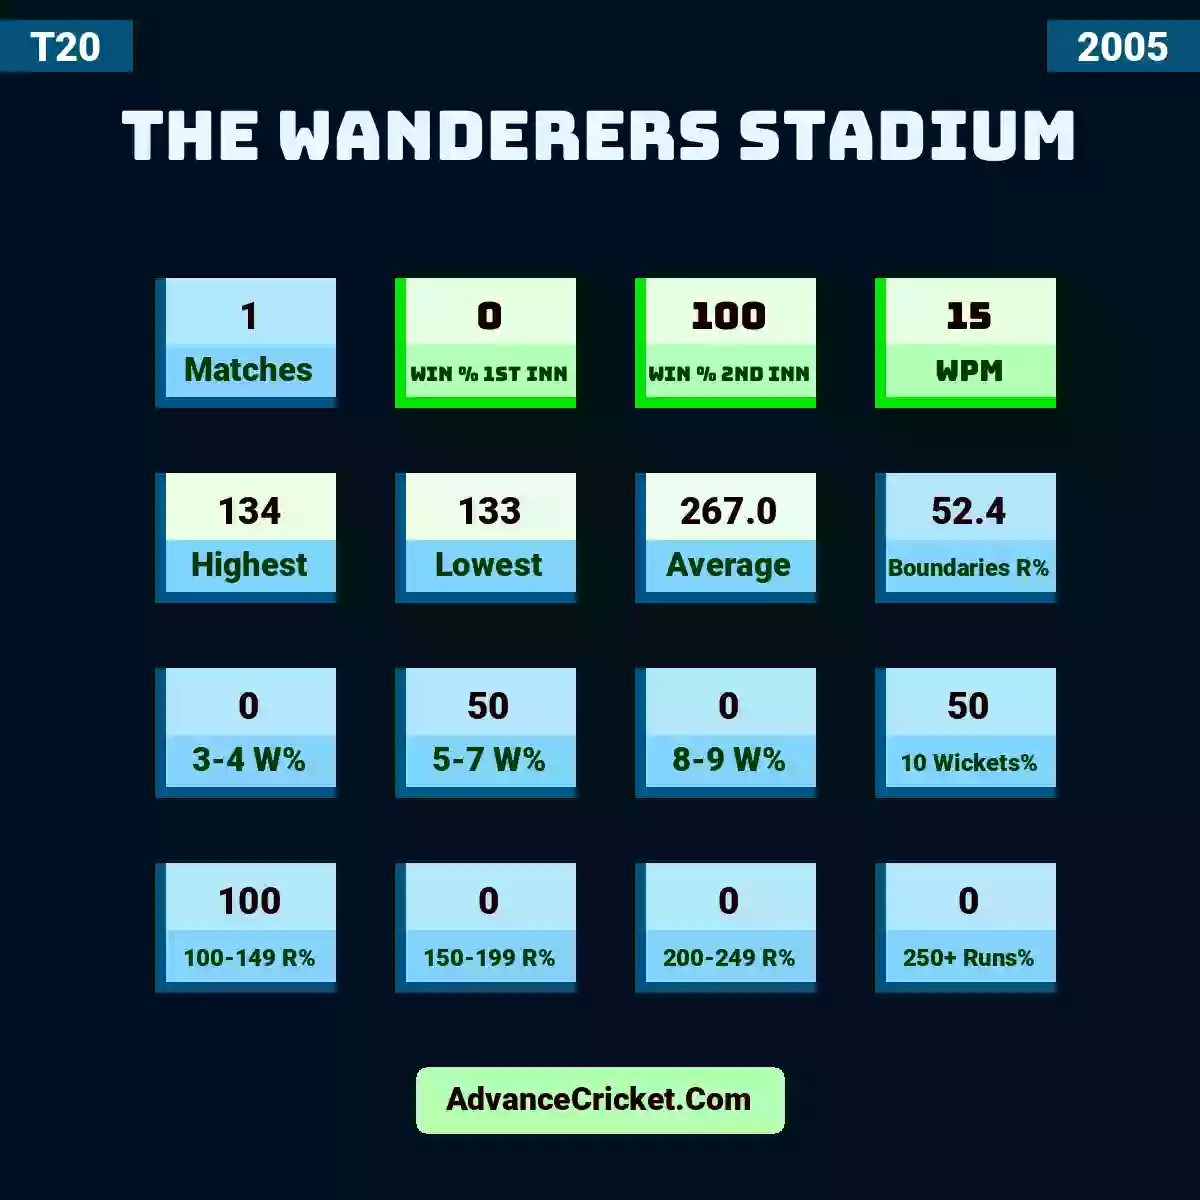 Image showing The Wanderers Stadium with Matches: 1, Win % 1st Inn: 0, Win % 2nd Inn: 100, WPM: 15, Highest: 134, Lowest: 133, Average: 267.0, Boundaries R%: 52.4, 3-4 W%: 0, 5-7 W%: 50, 8-9 W%: 0, 10 Wickets%: 50, 100-149 R%: 100, 150-199 R%: 0, 200-249 R%: 0, 250+ Runs%: 0.